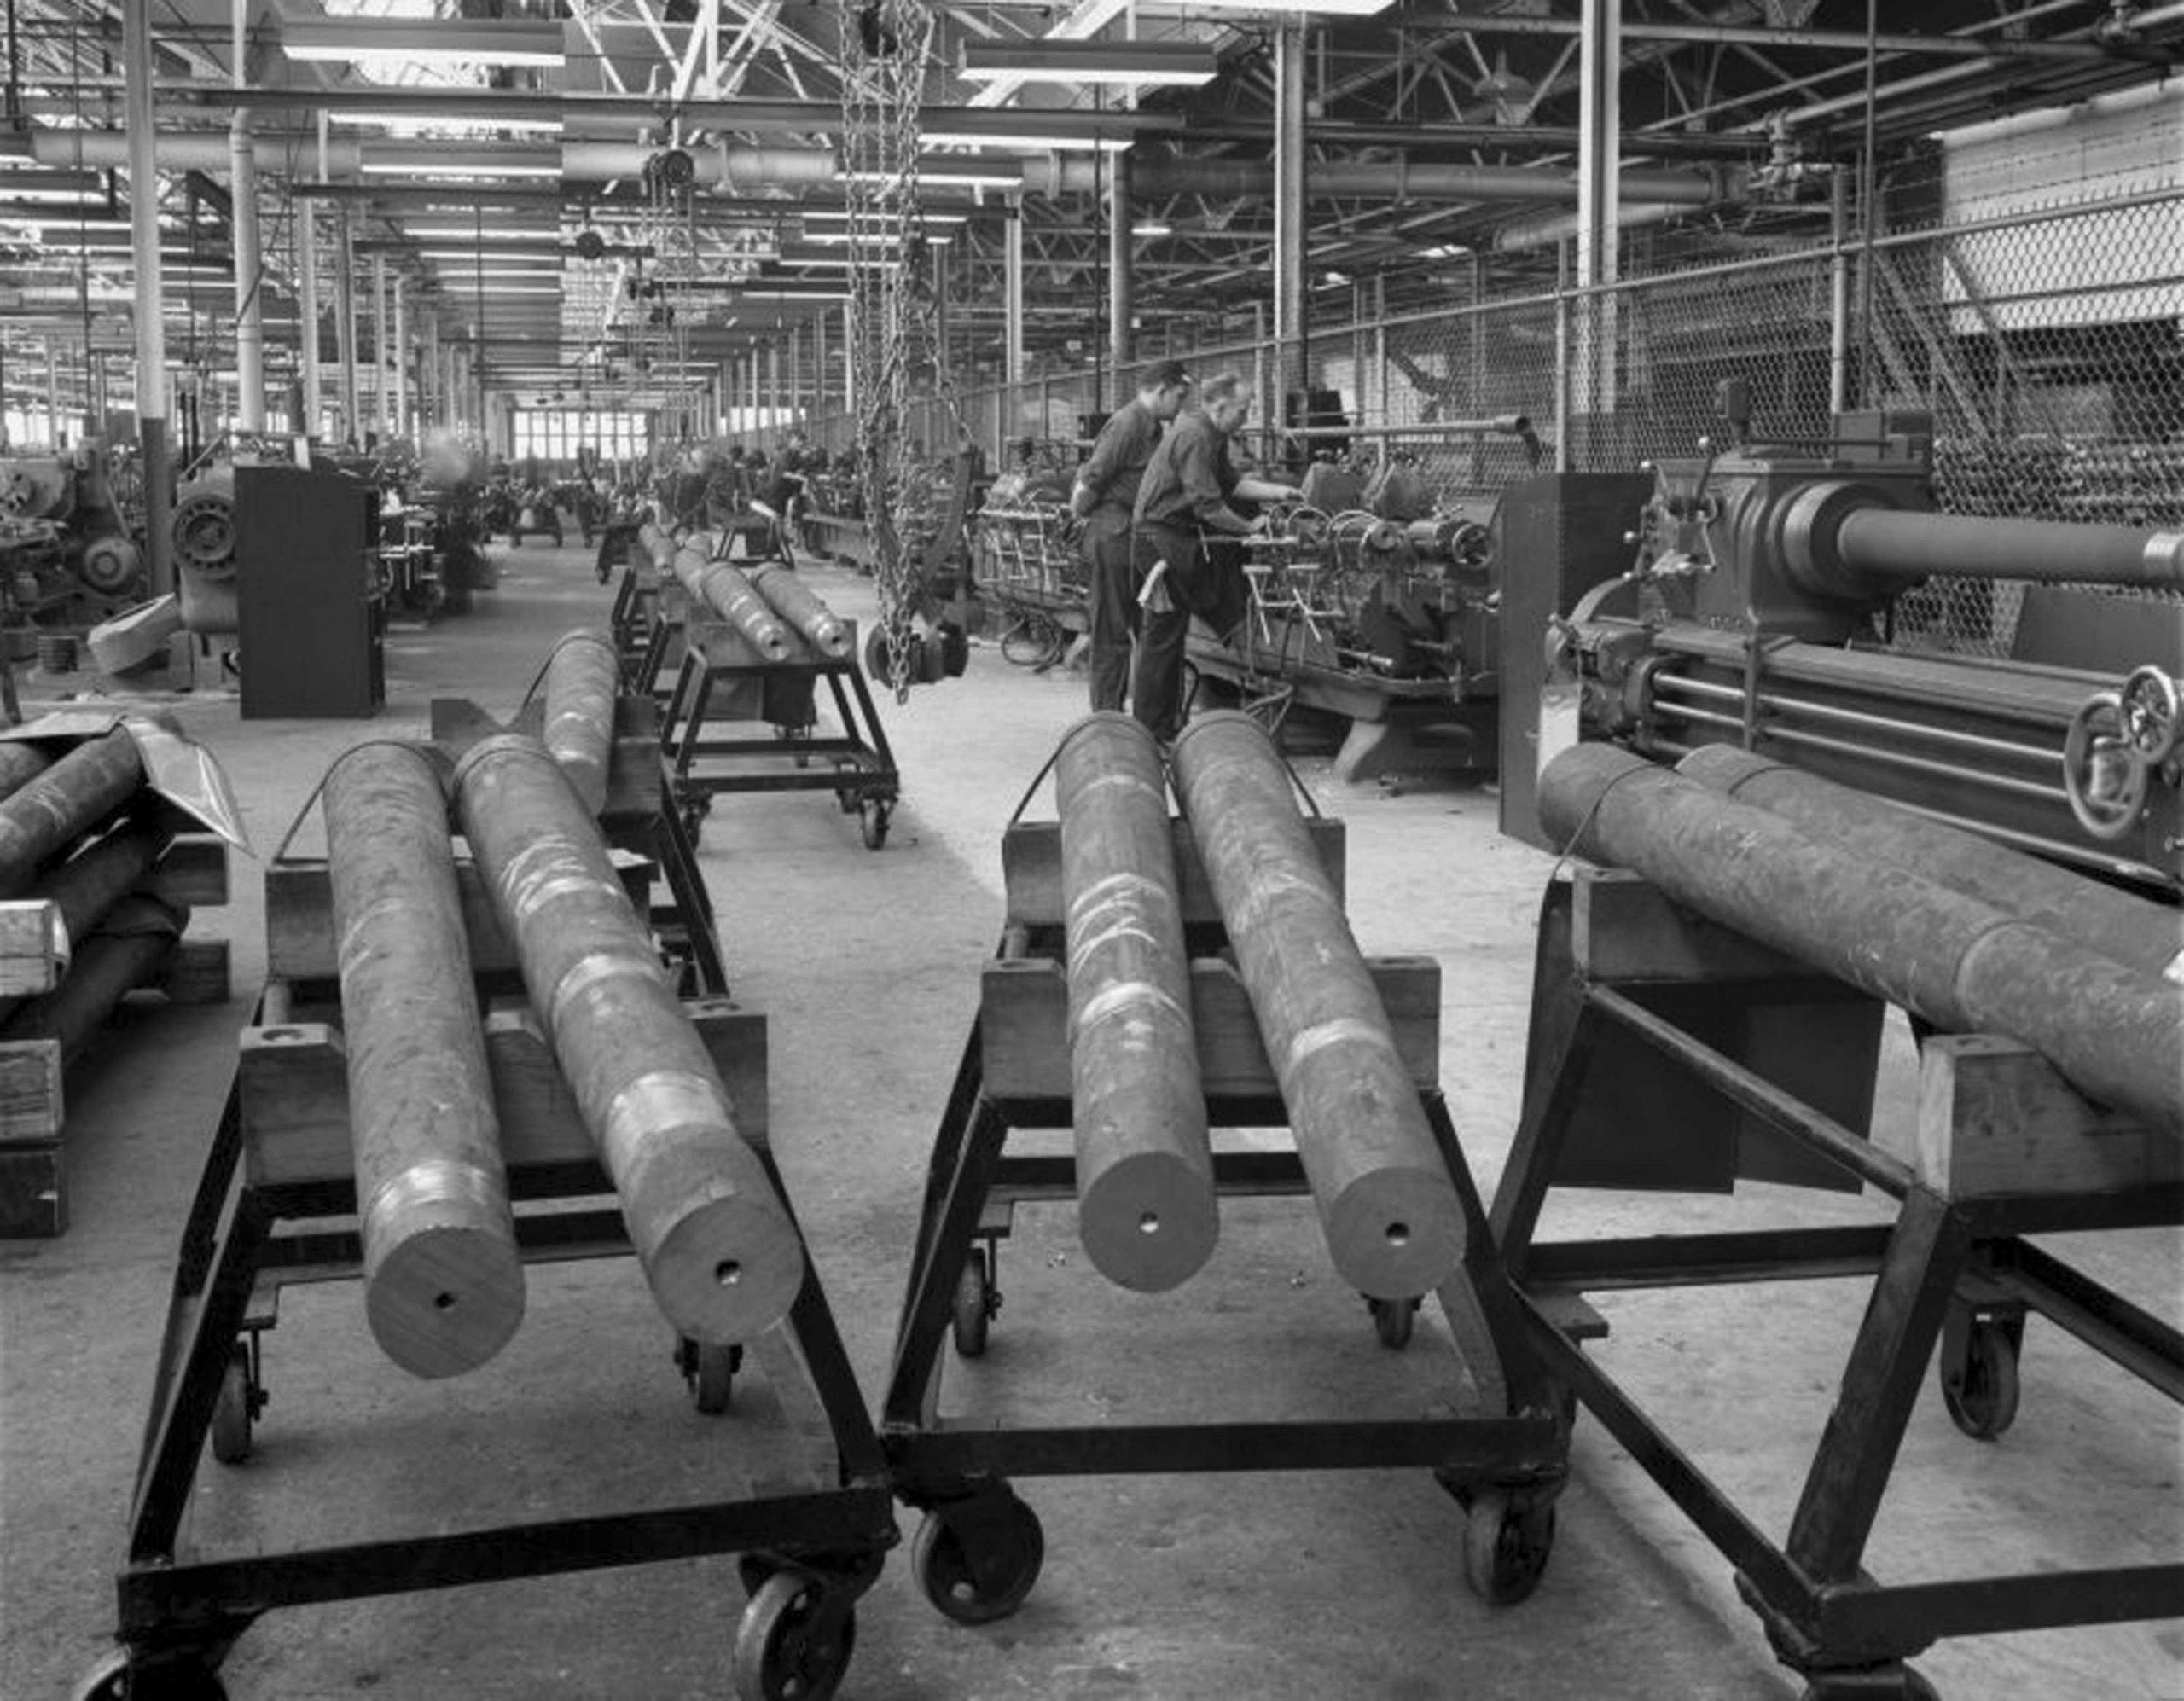 Blanks for the barrels of 40-mm Bofors anti-aircraft guns